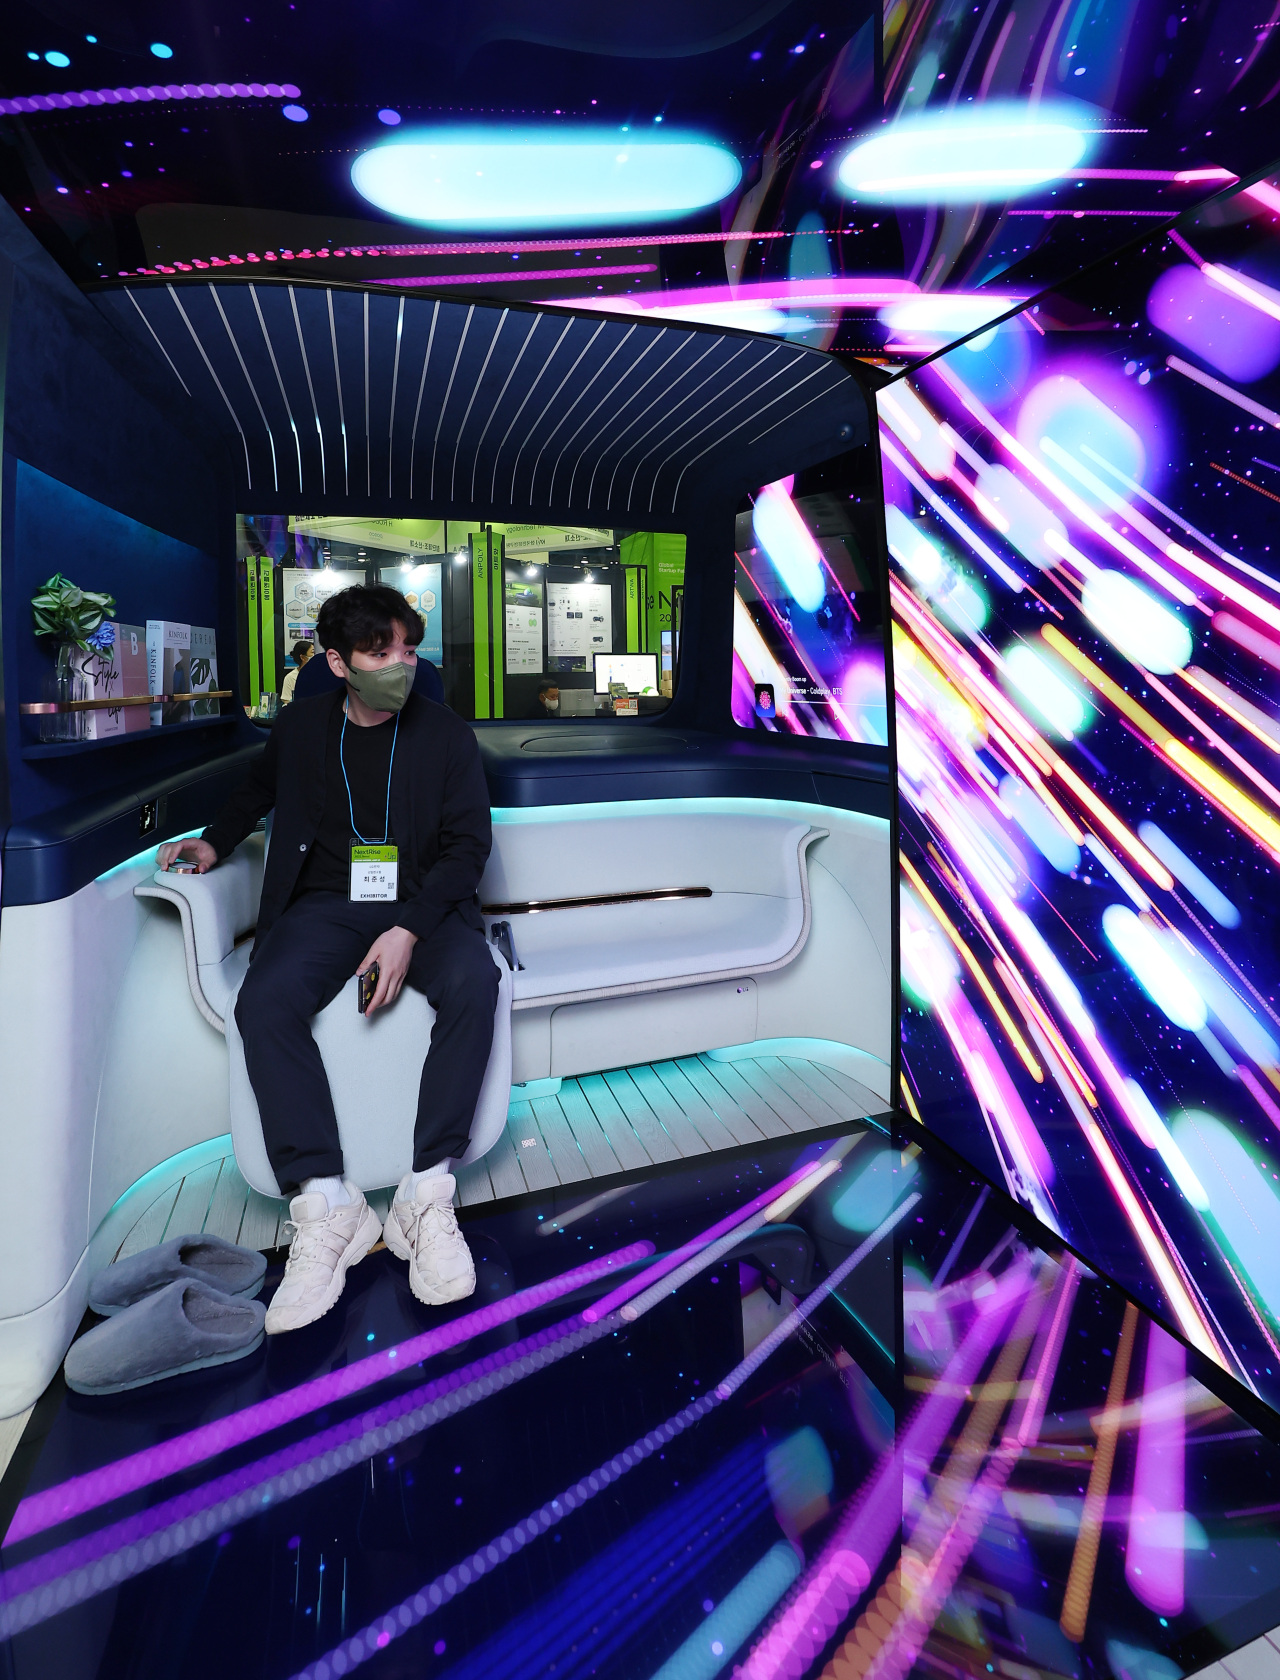 A visitor tries a futuristic car cabin experience with LG Omnipod, which uses LG‘s cutting-edge flat-panel display technology, at NextRise 2022 in Coex, Seoul, in June. (Yonhap)